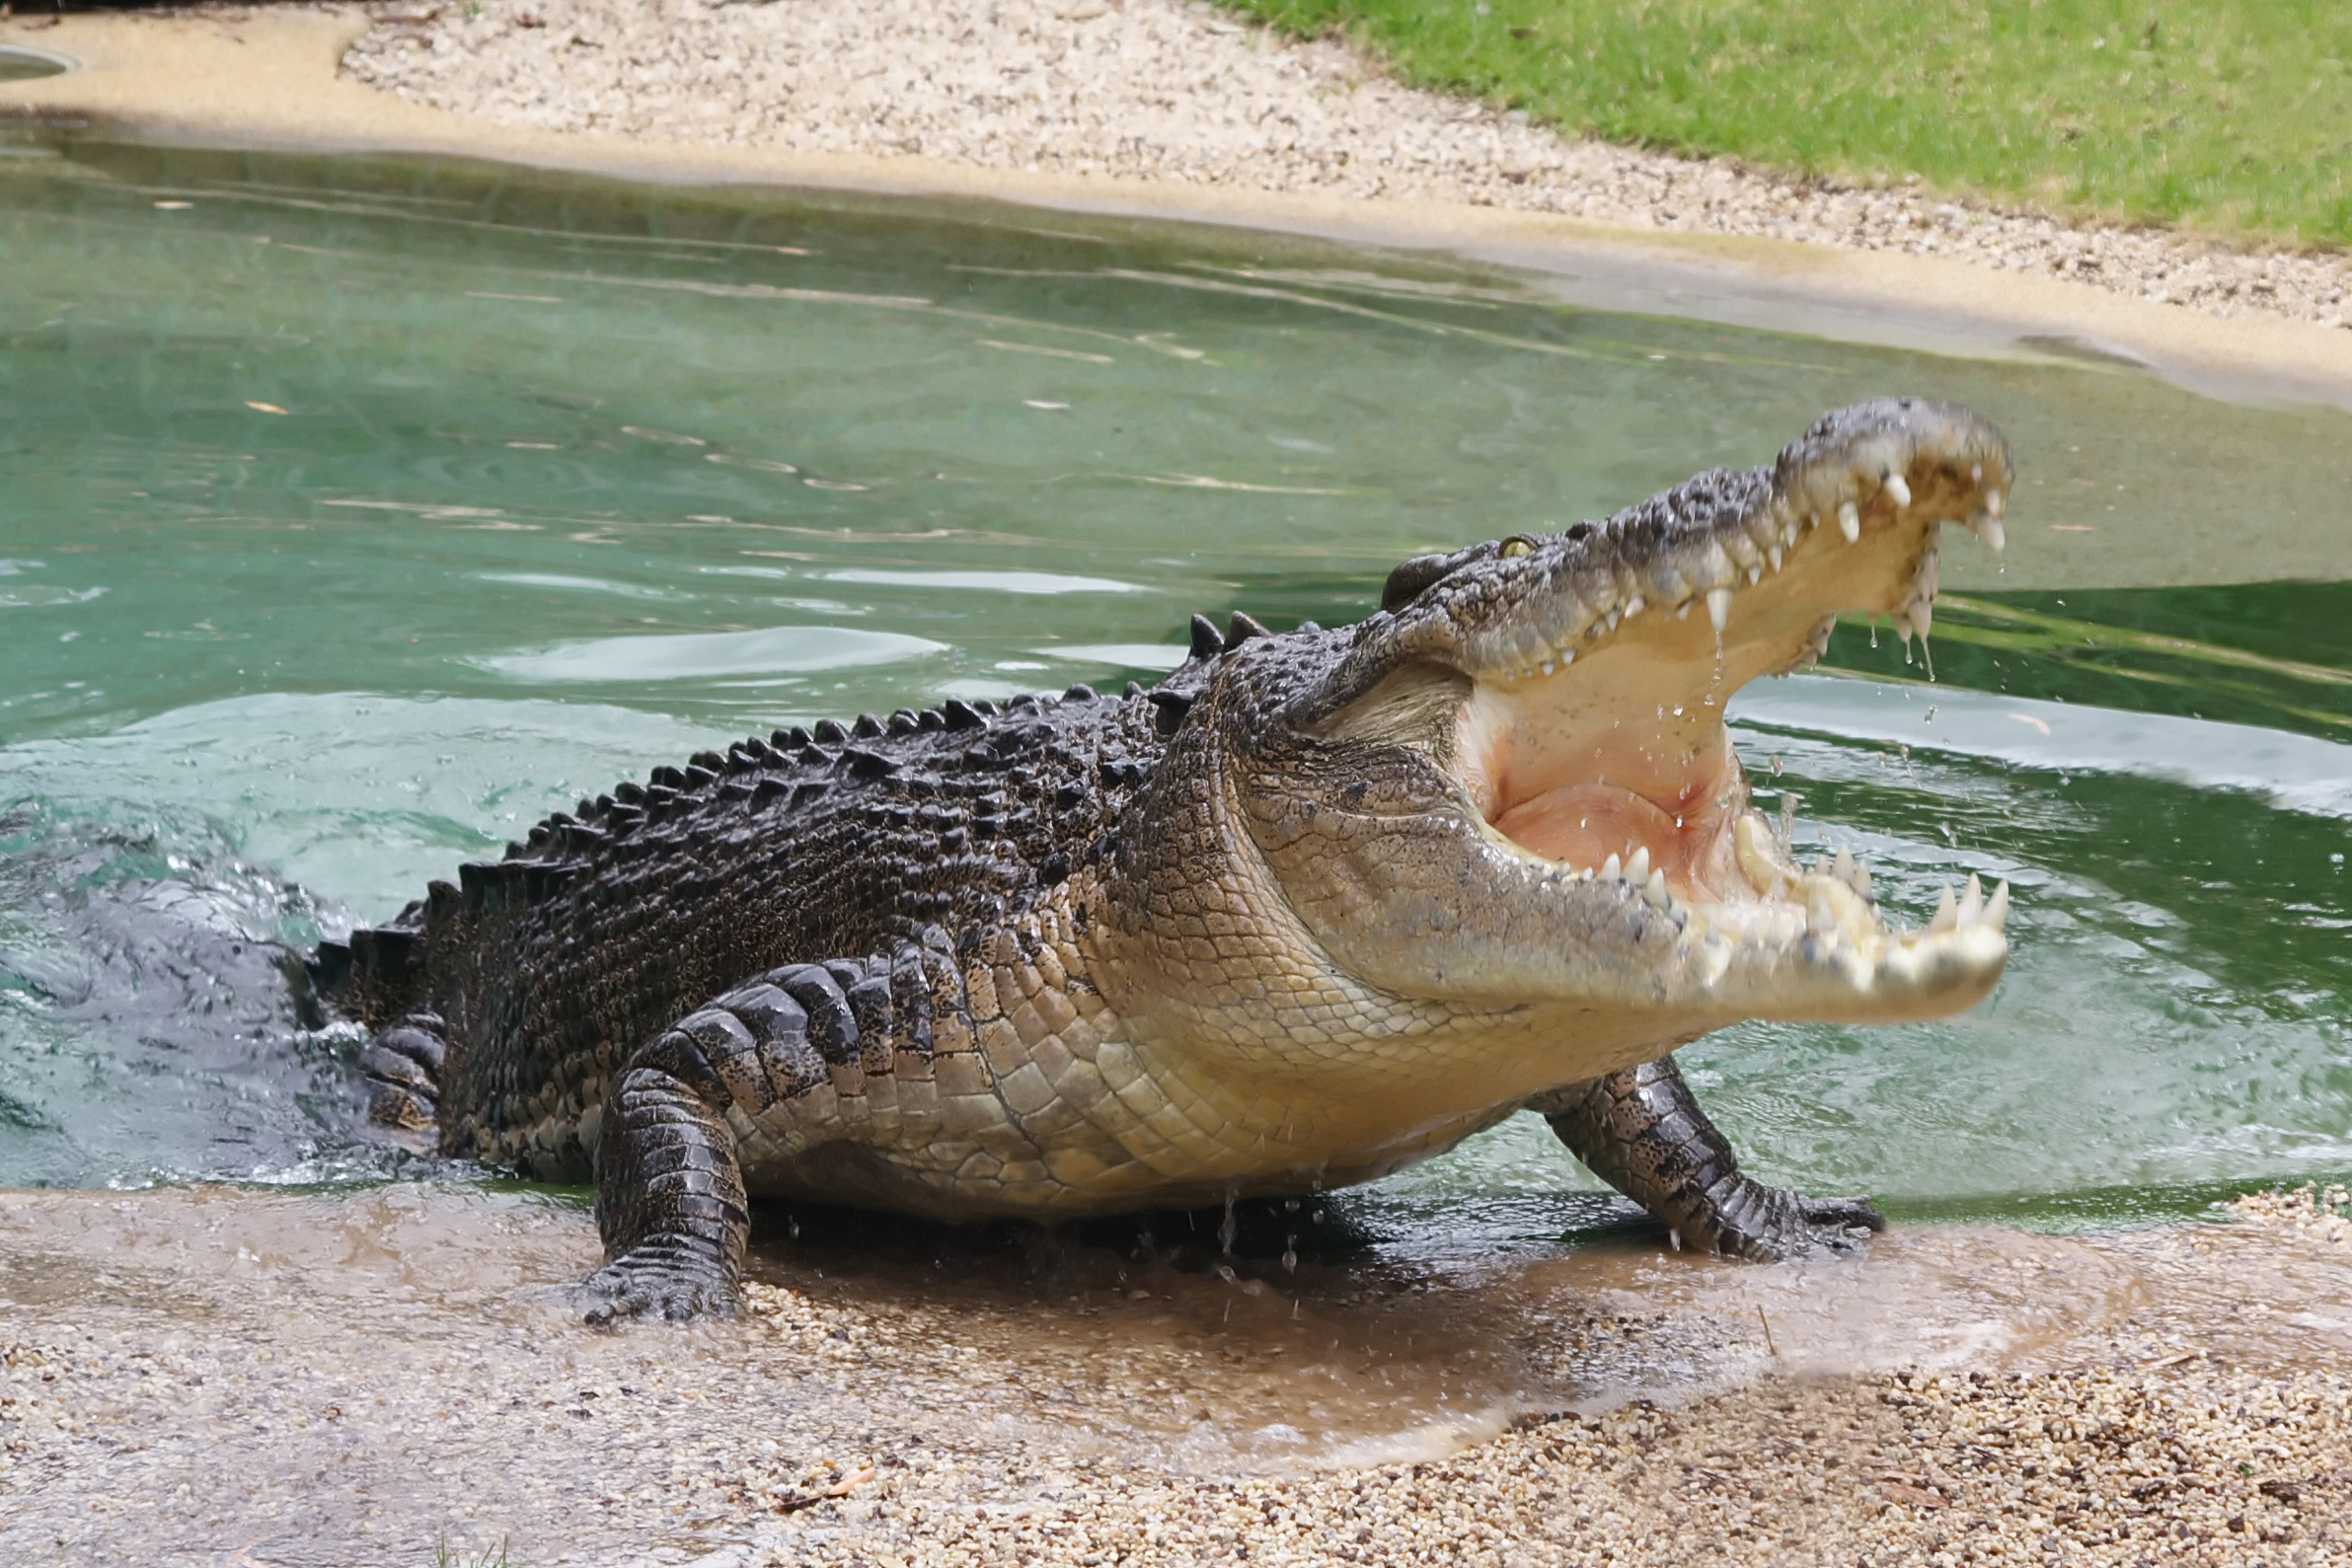 Monster Crocodile, 20 Feet Long, Attacks Tiny Boat: 'Everything Went Black'